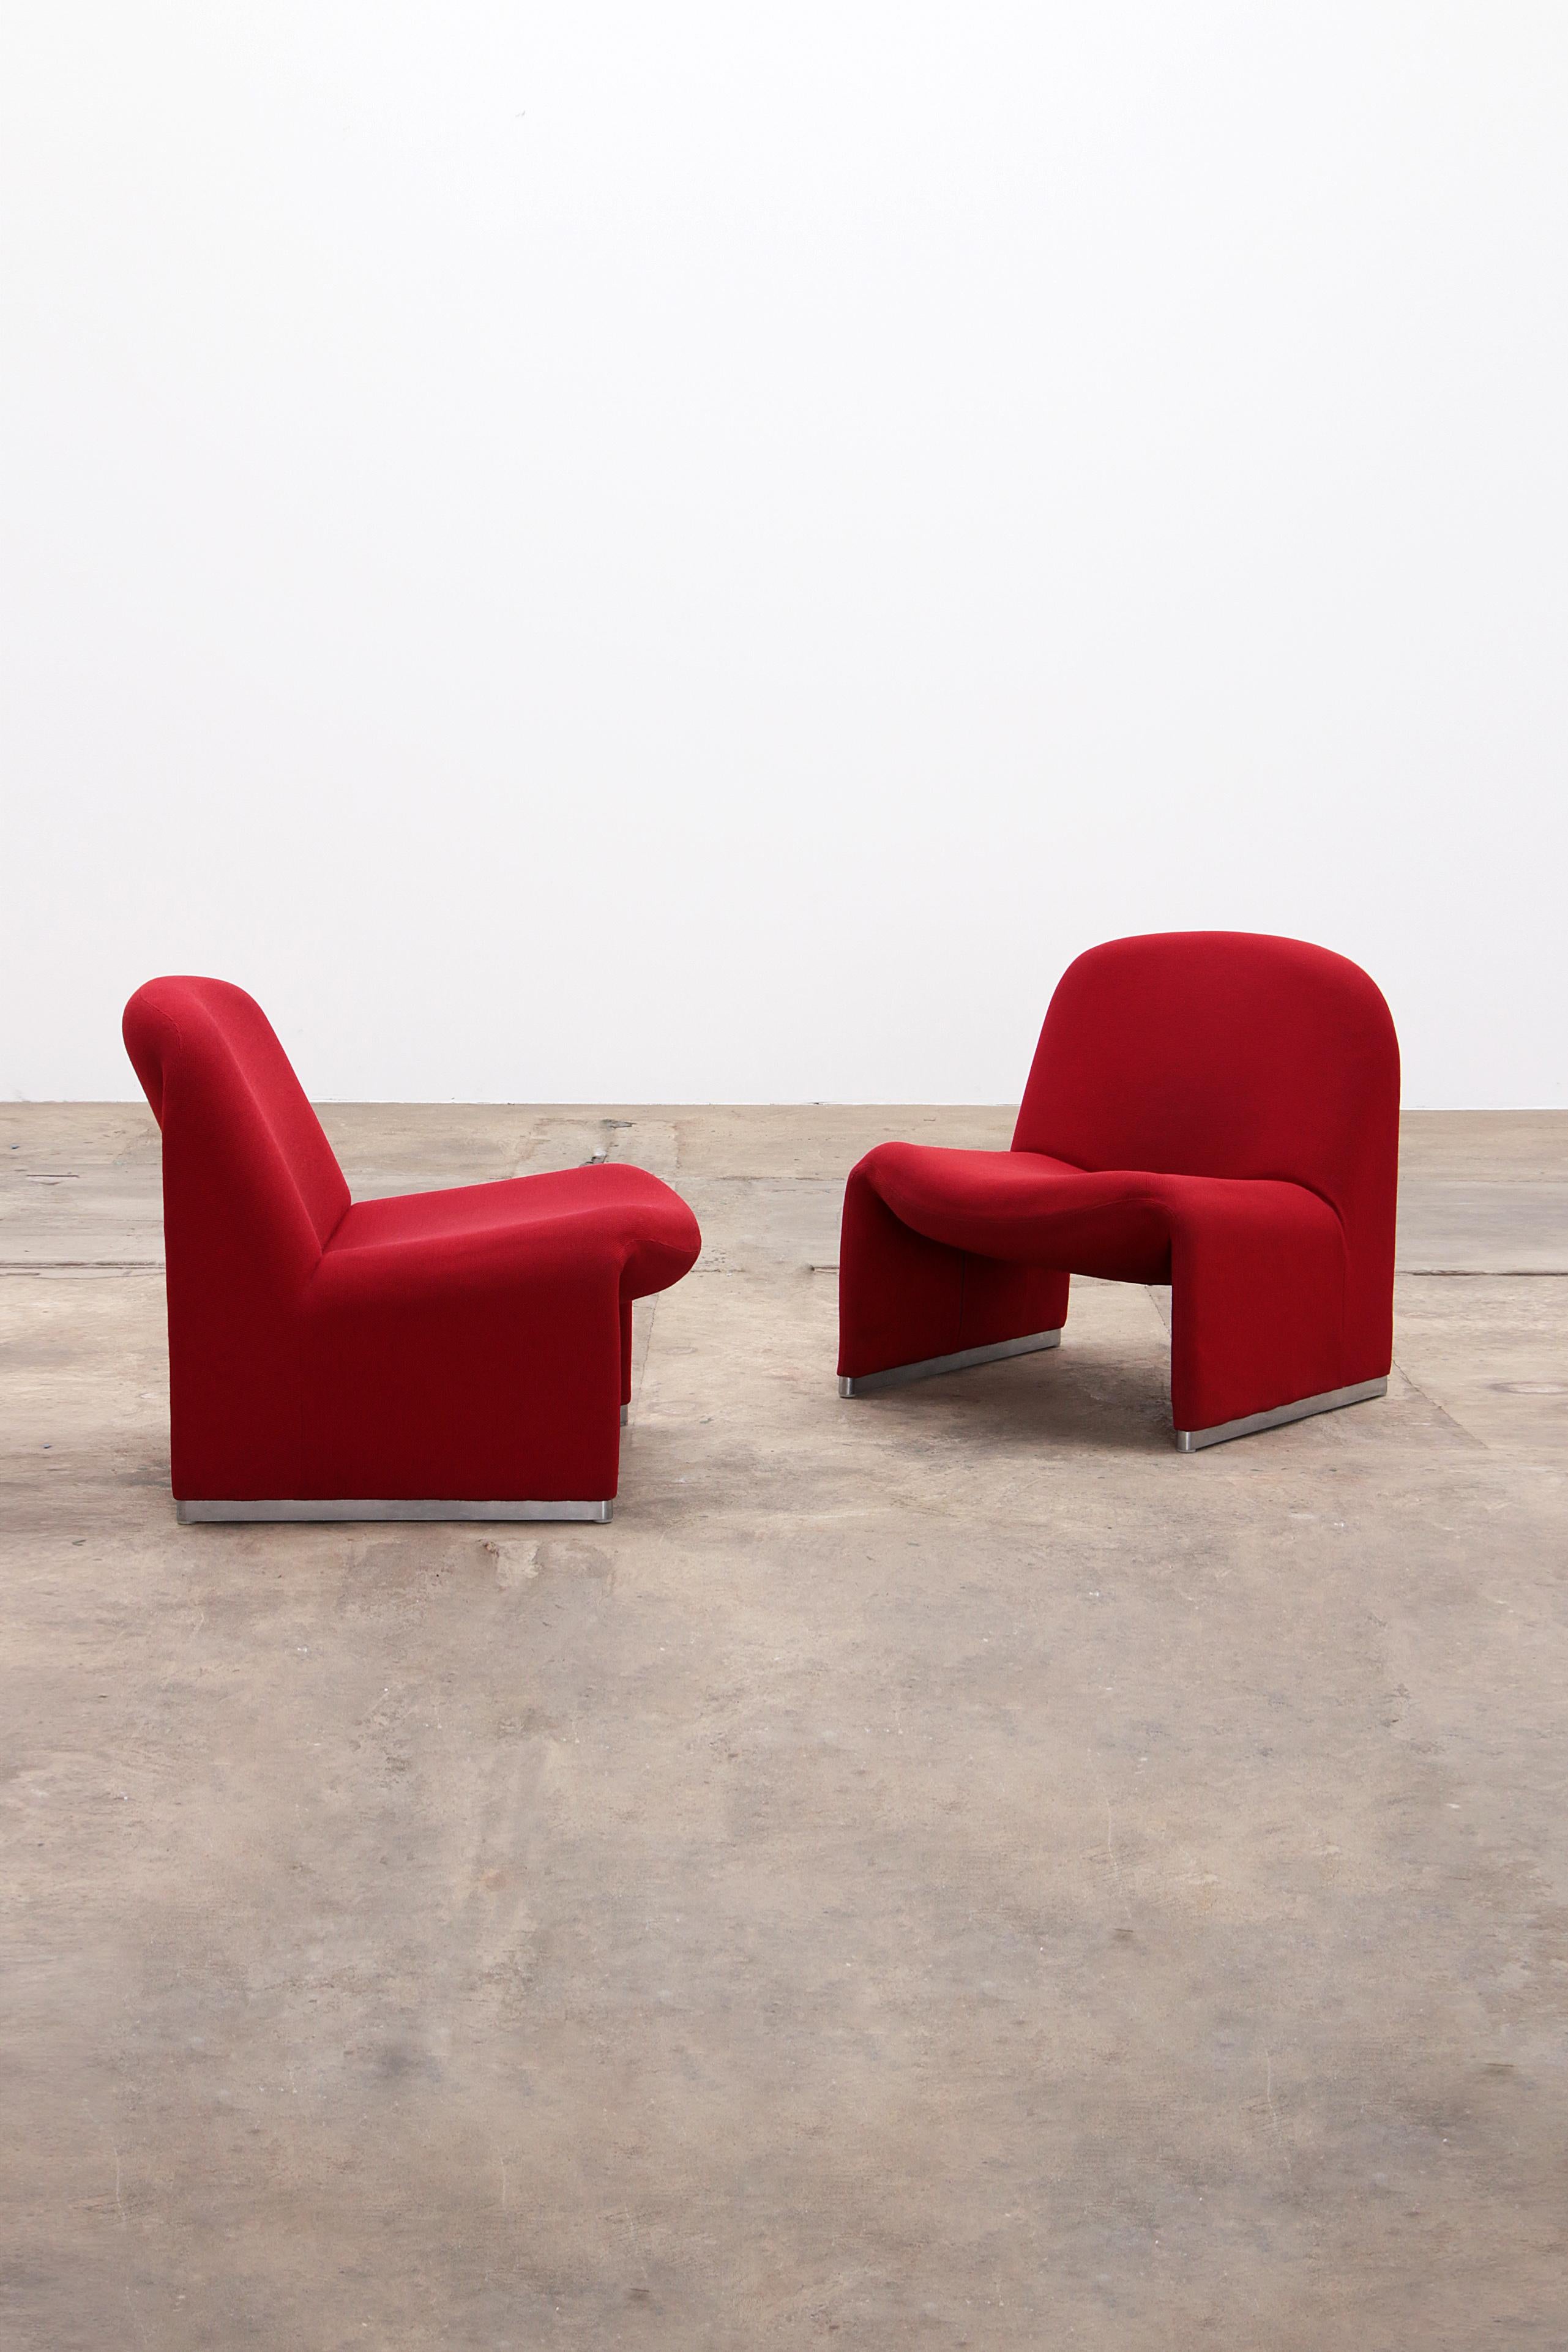 Artifort Alky chair Set Design by Giancario Piretti,1960
Today is red….

This colorful red 'Alky' easy chair is a design by Giancarlo Piretti.

Produced in the 1960s/70s by Castelli.

Country of origin: Italy.

This chair was later also produced